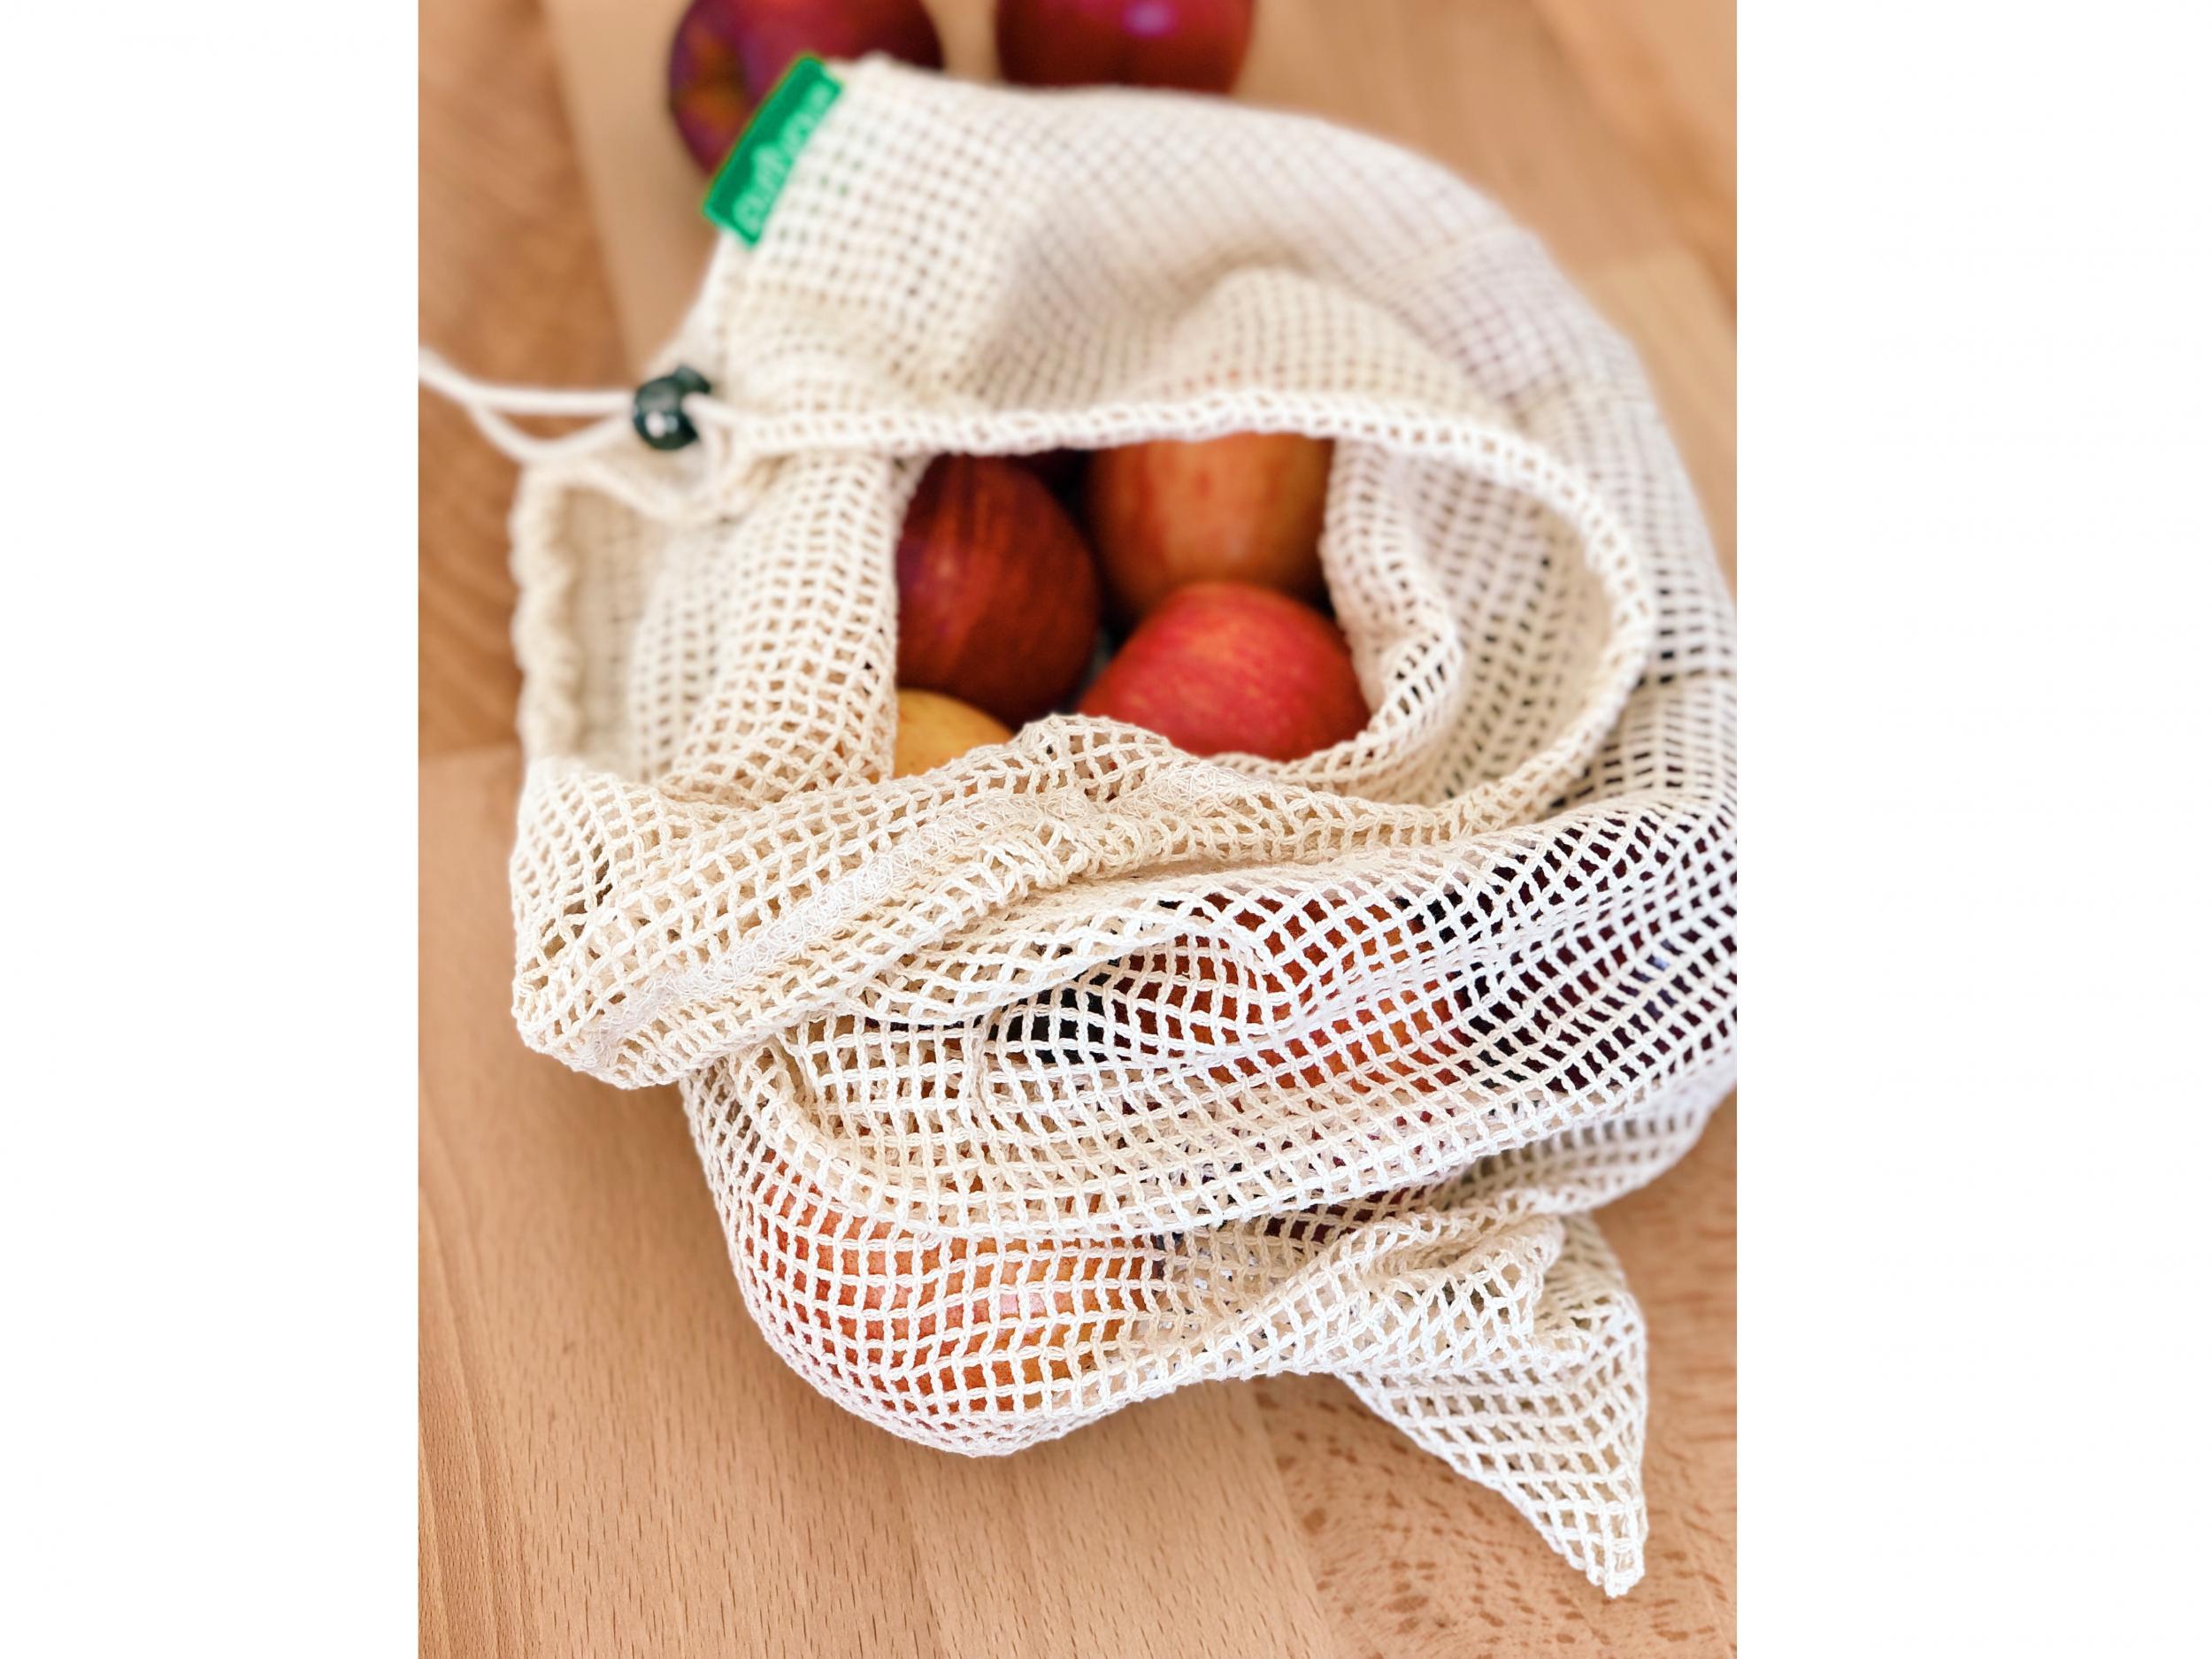 pack of 7 WenderGo Reusable Mesh Produce Bags Eco-friendly Premium Organic Cotton Washable Grocery Produce Bags Lightweight for Fruit Vegetable 